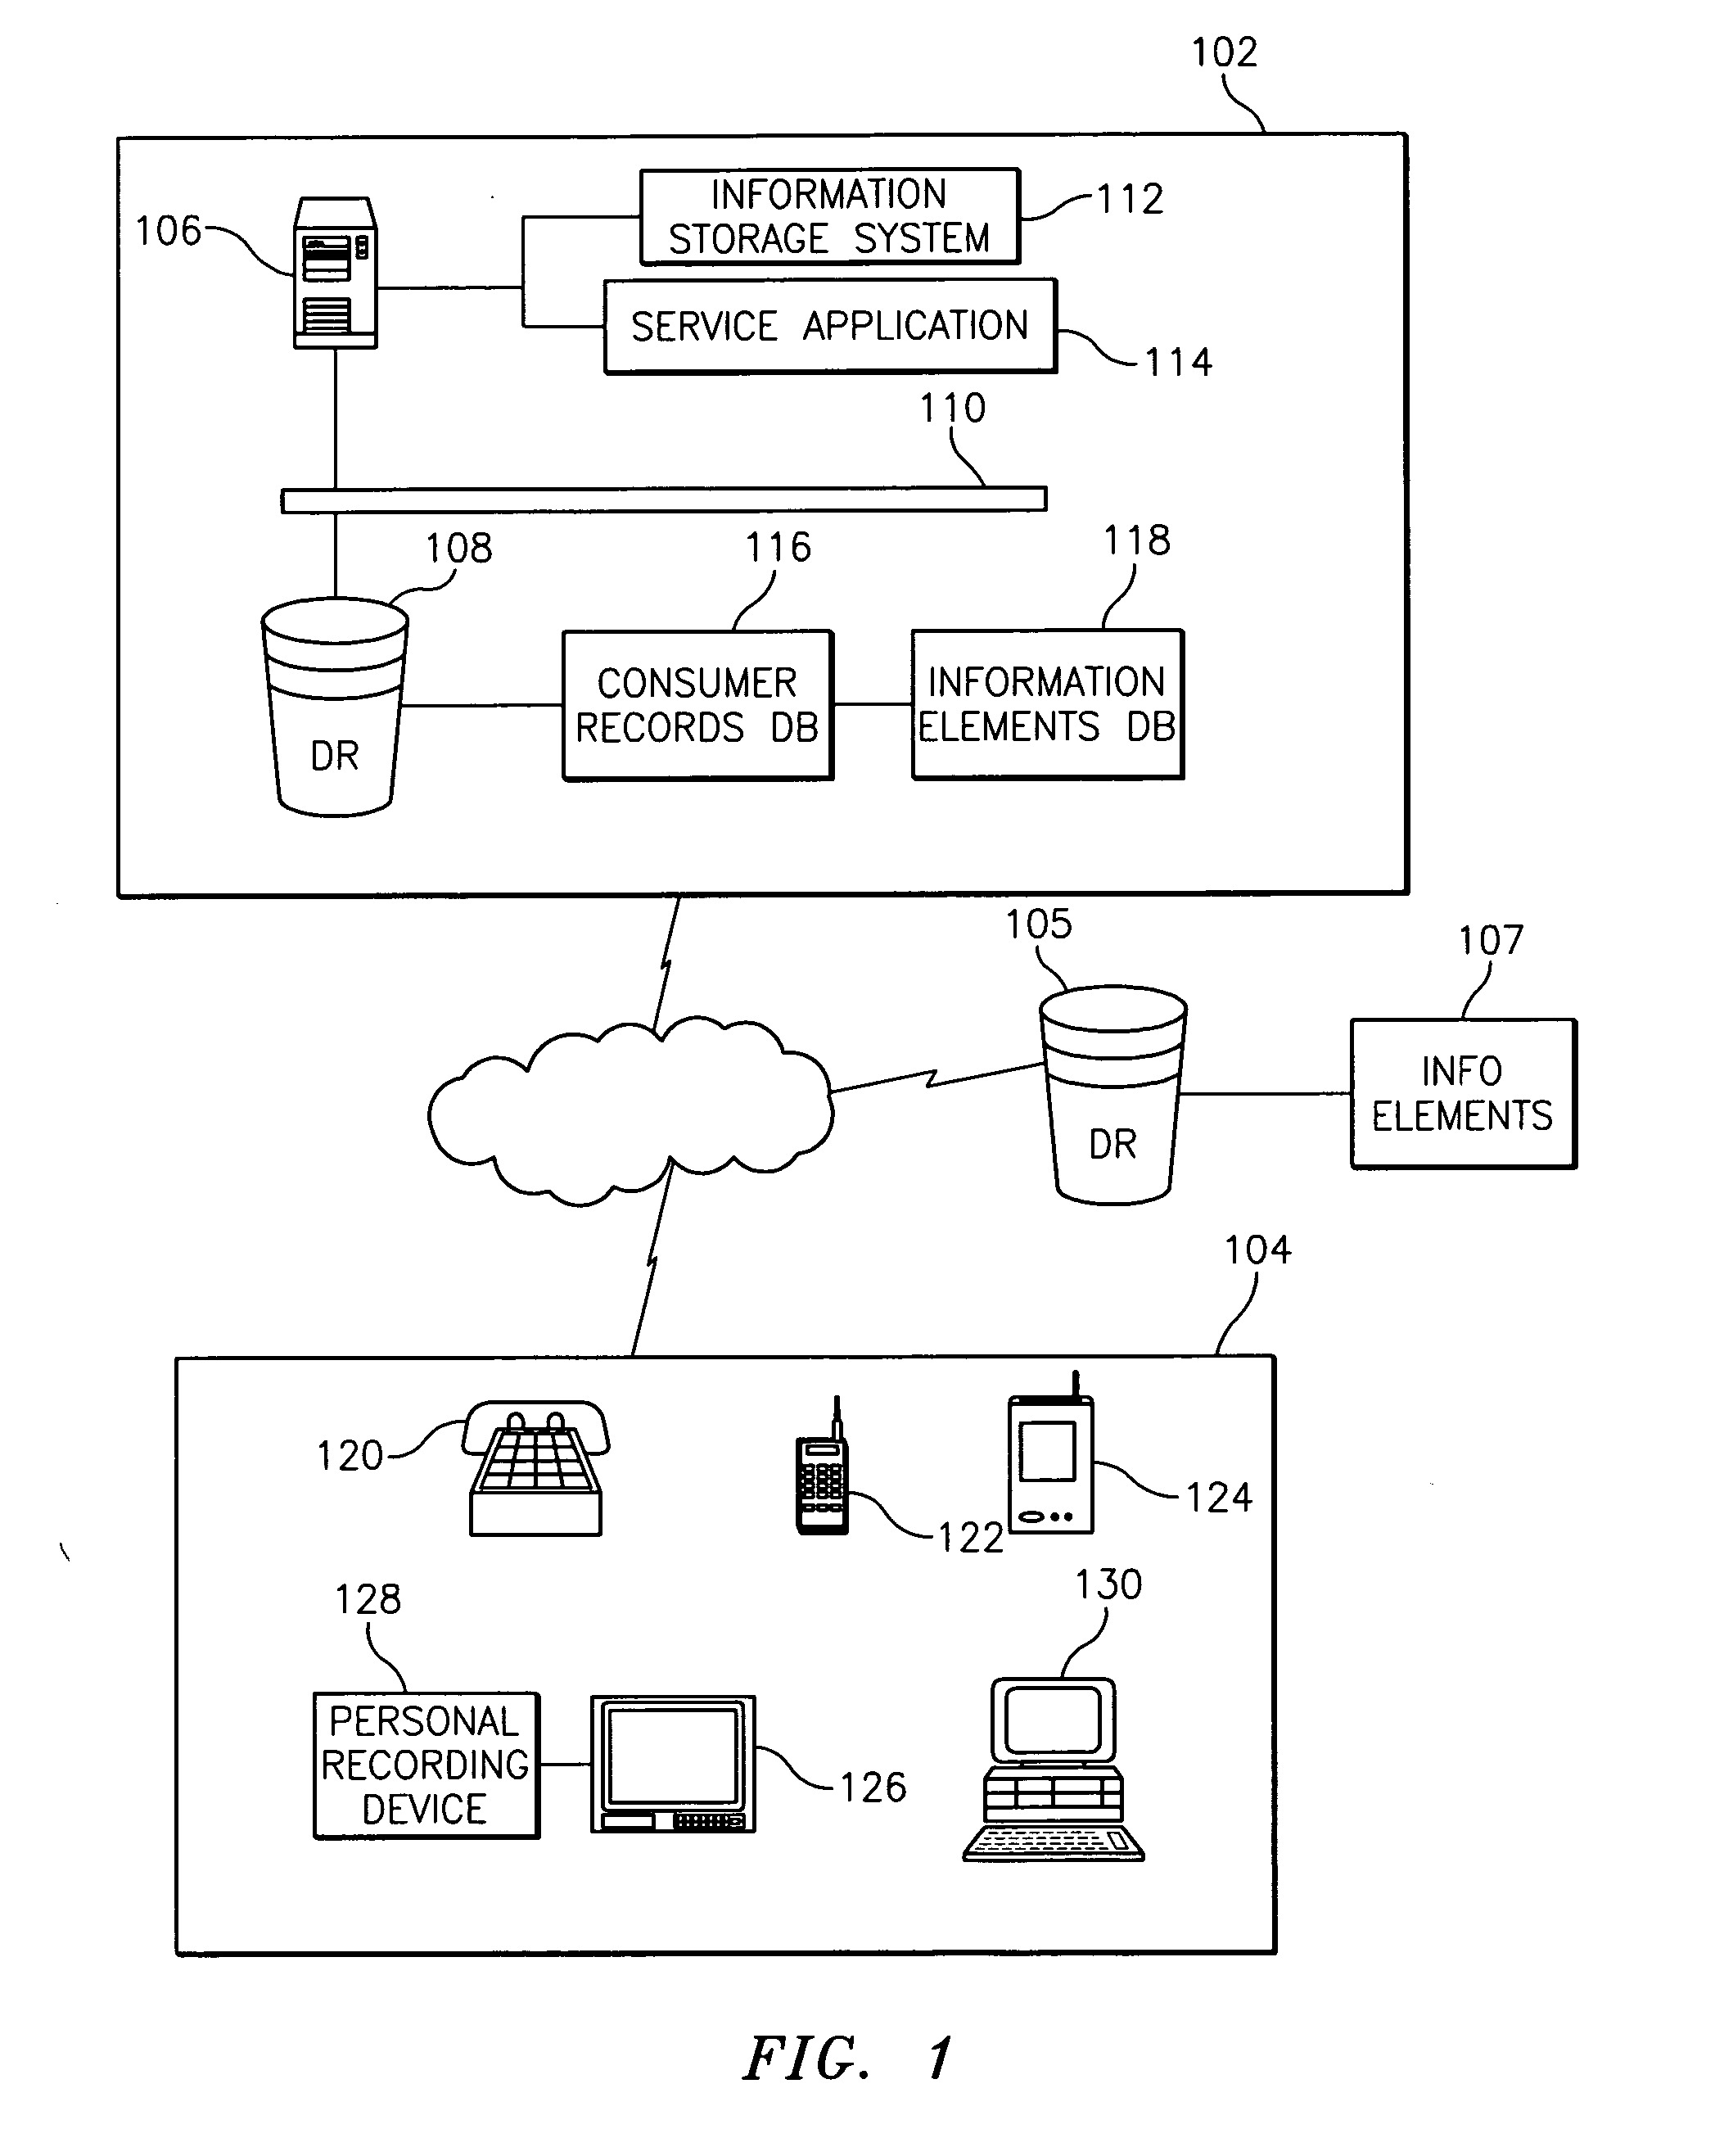 Methods, systems, and storage mediums for providing information storage services